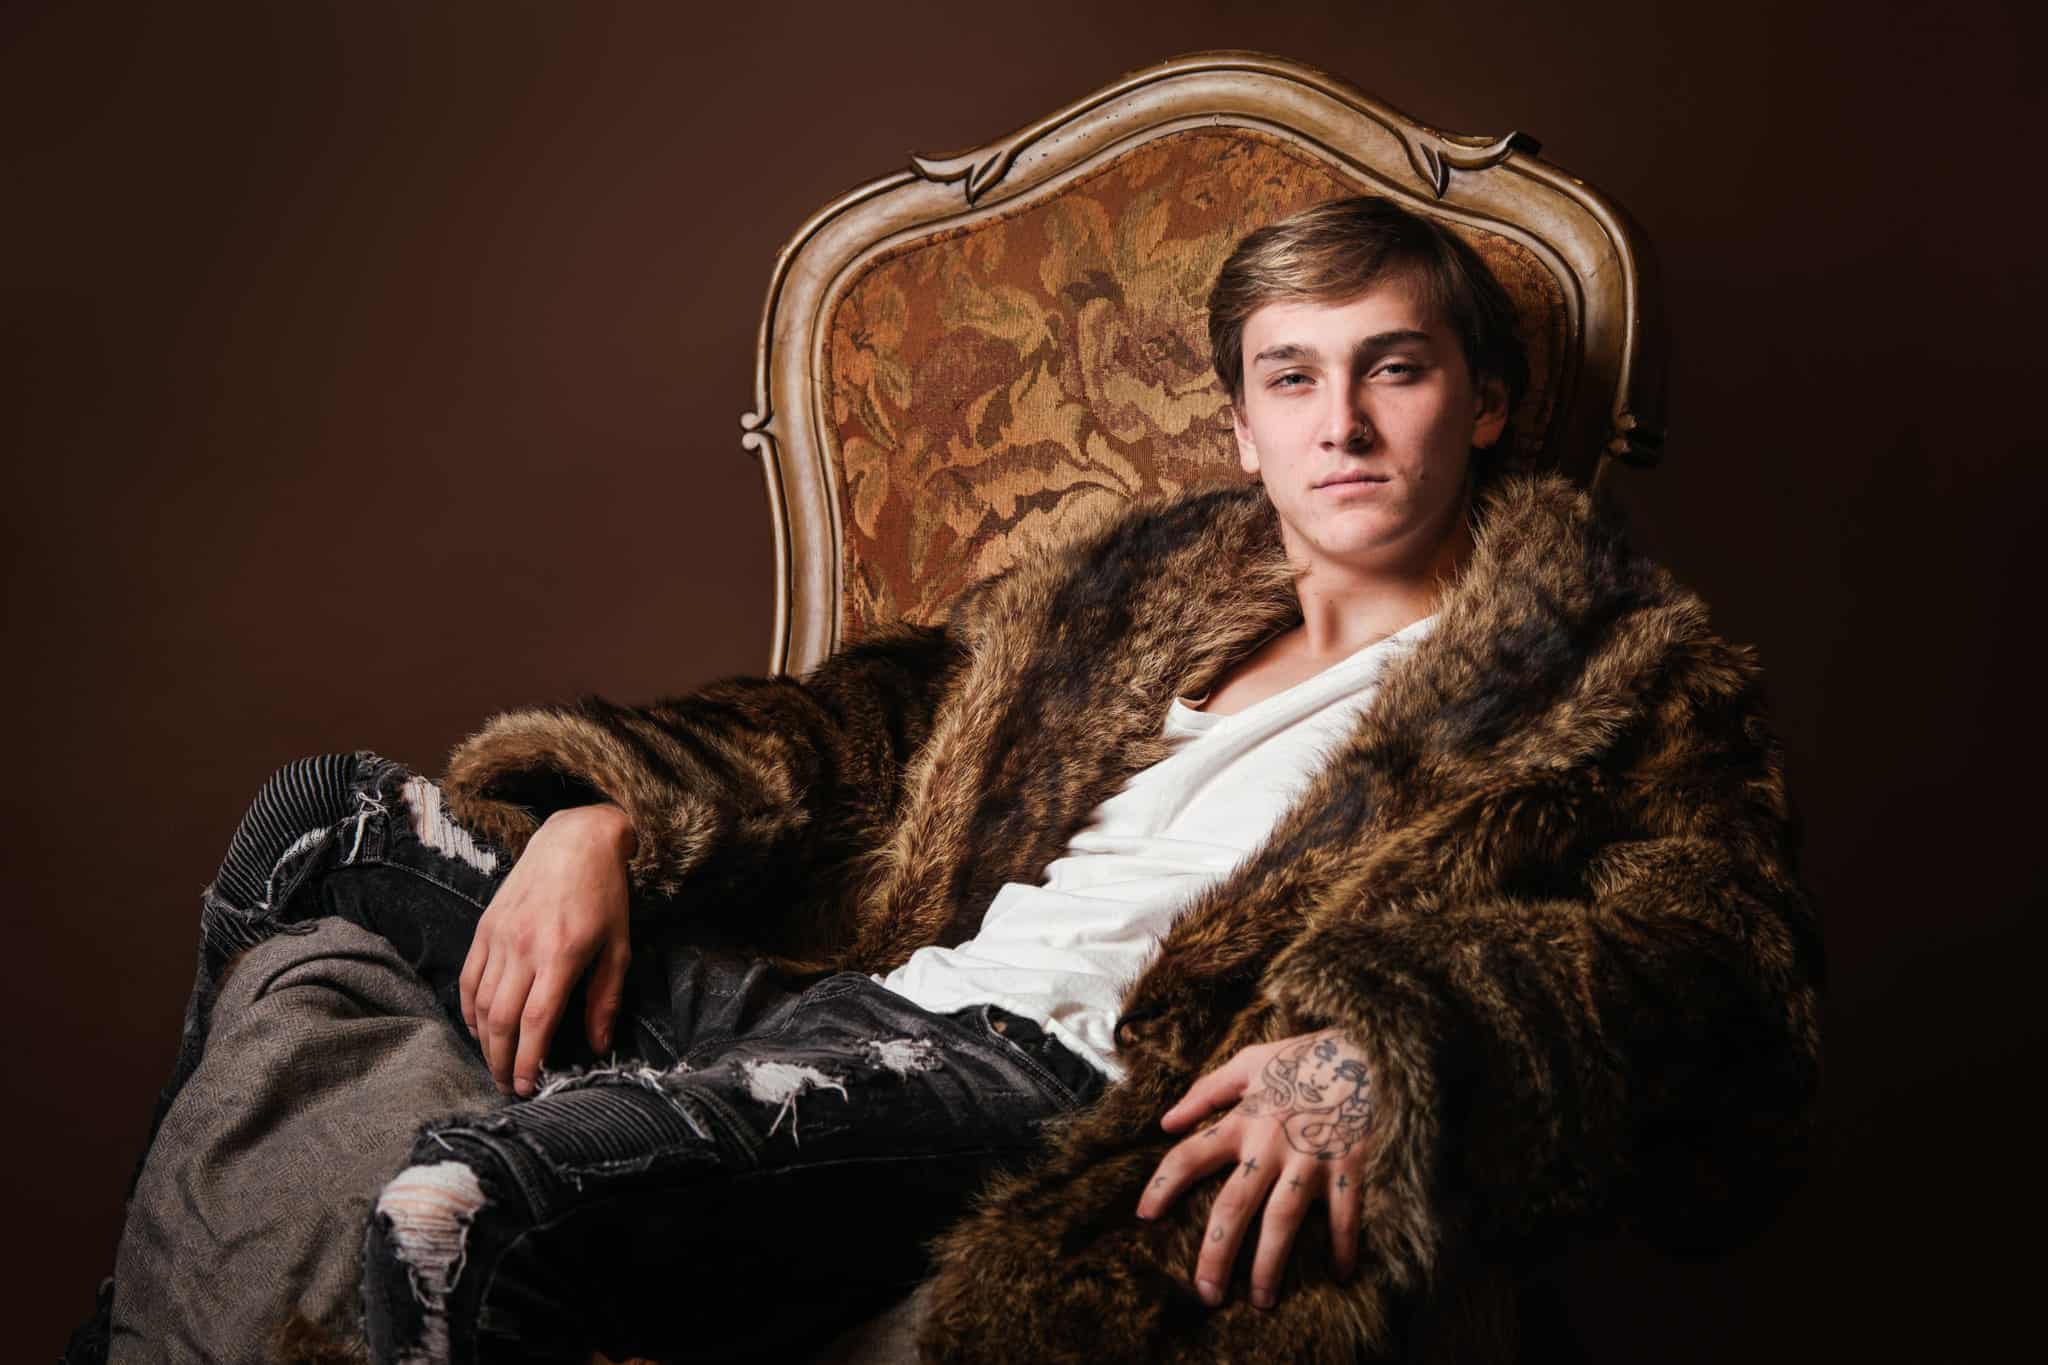 senior pictures for guys - portrait of young man in a fur coat sitting in a throne